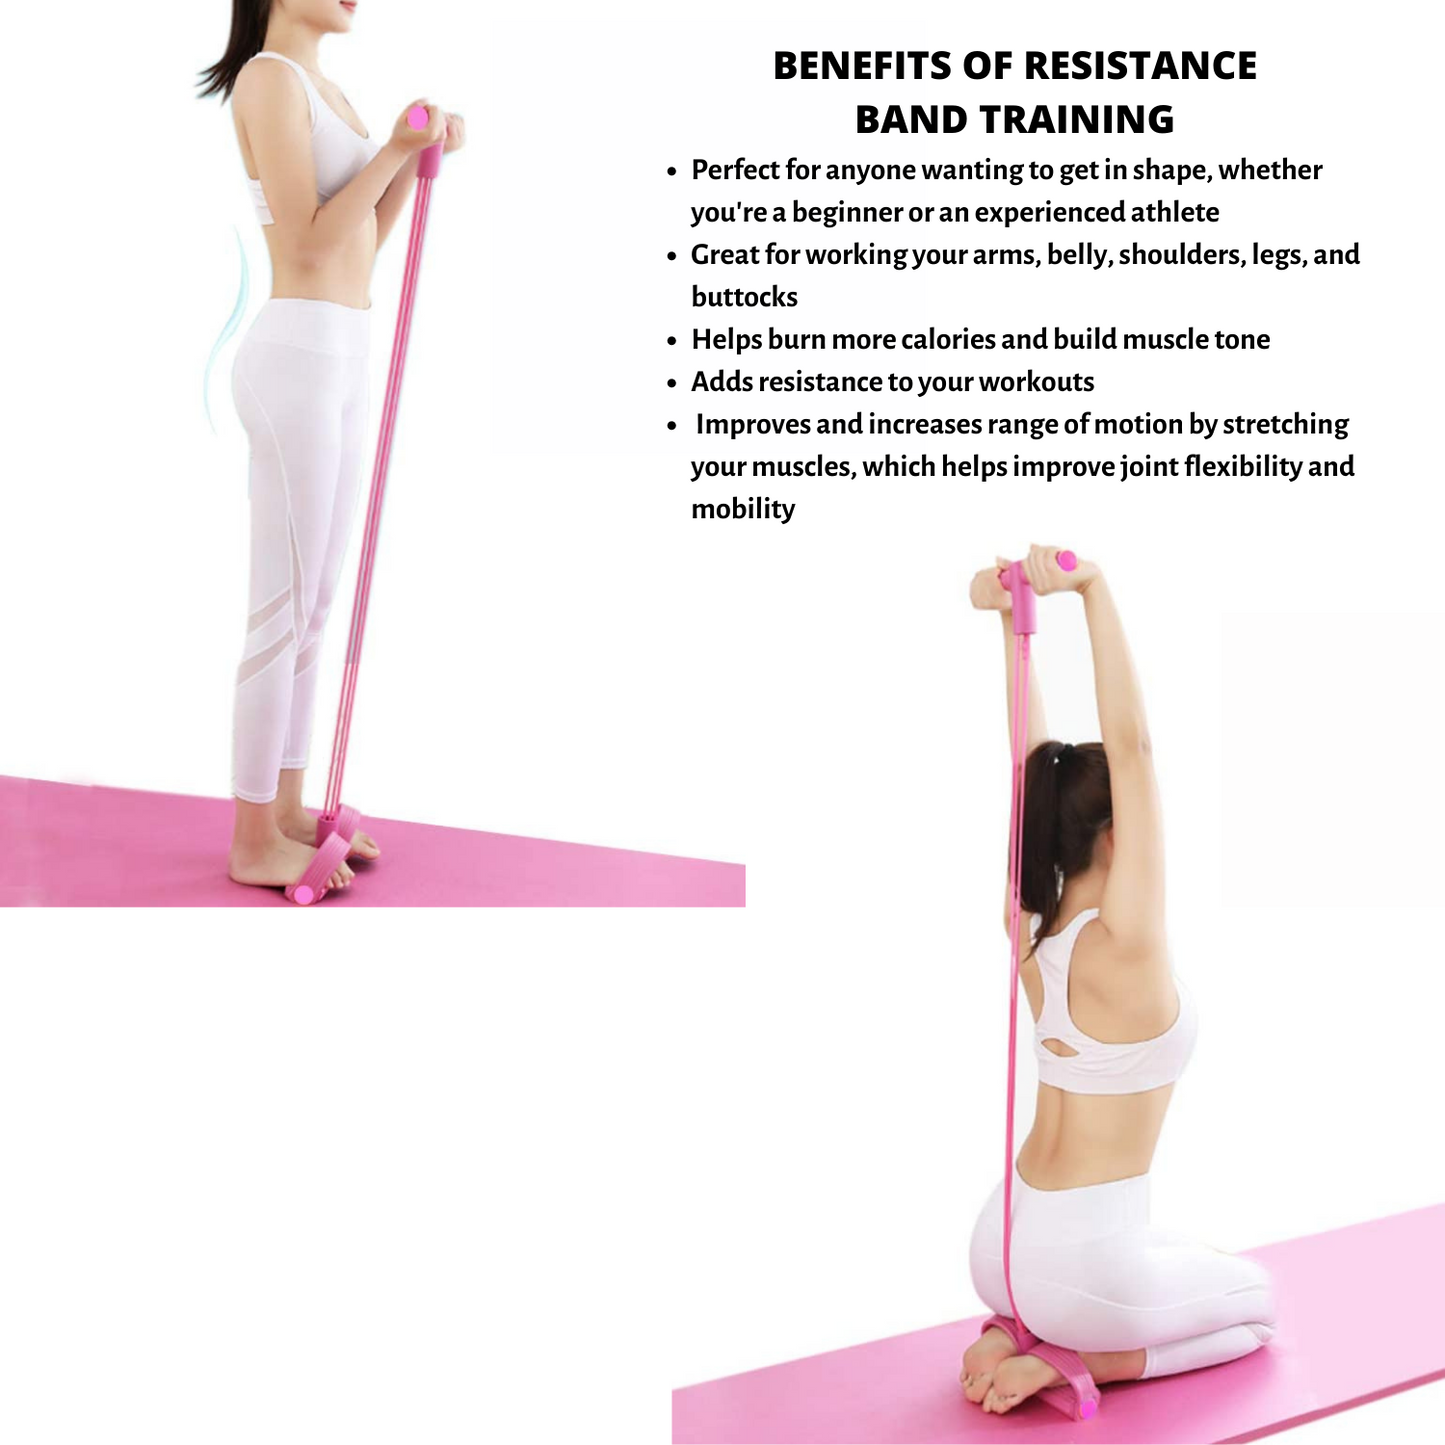 Pedal Resistance Band for Training Arms, Abs, Waist and Yoga